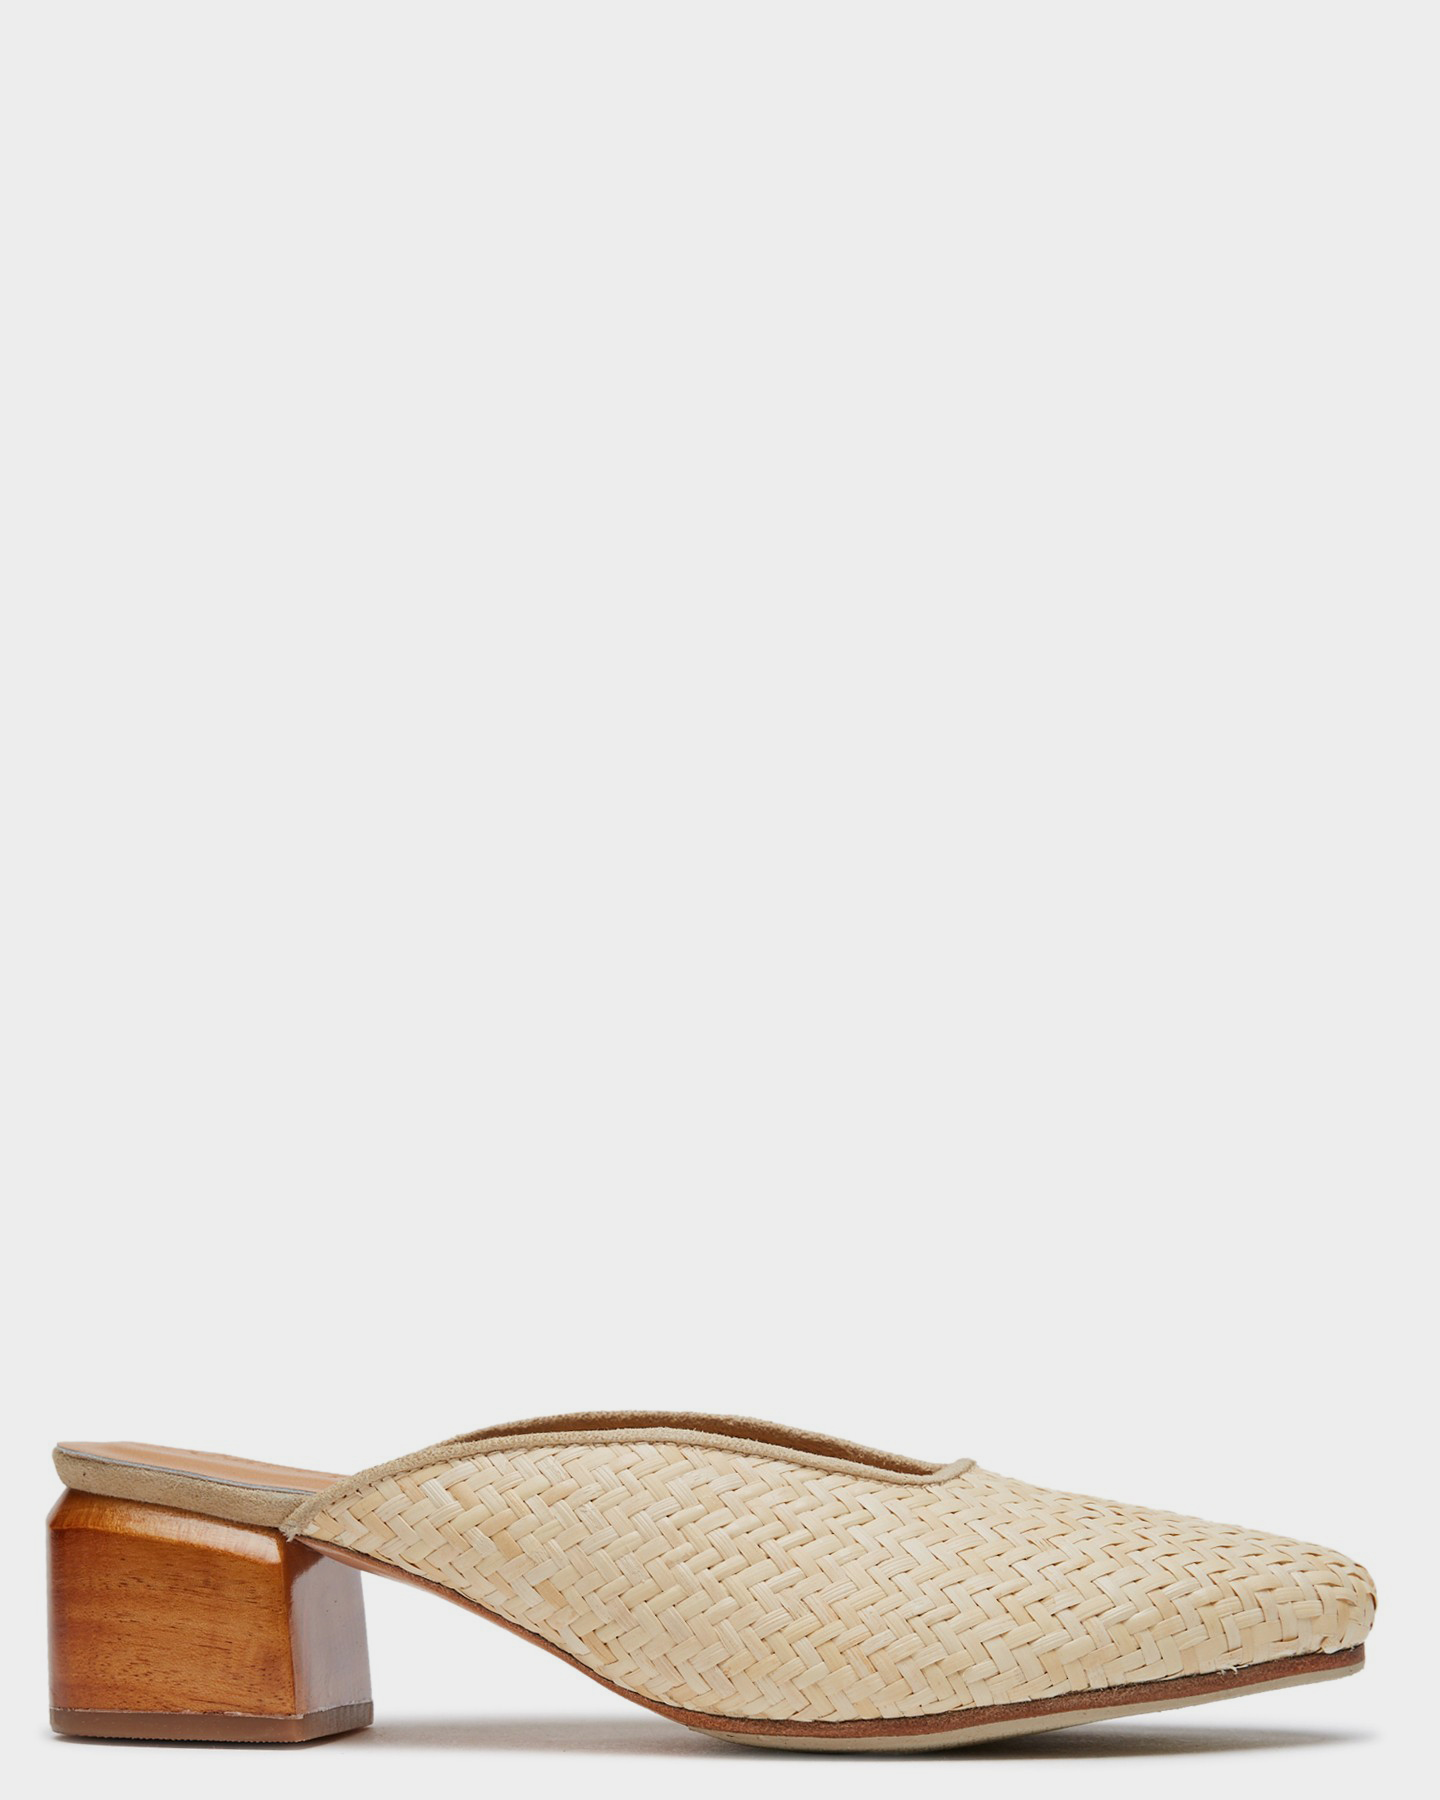 James Smith Cafe Society Woven Mule 